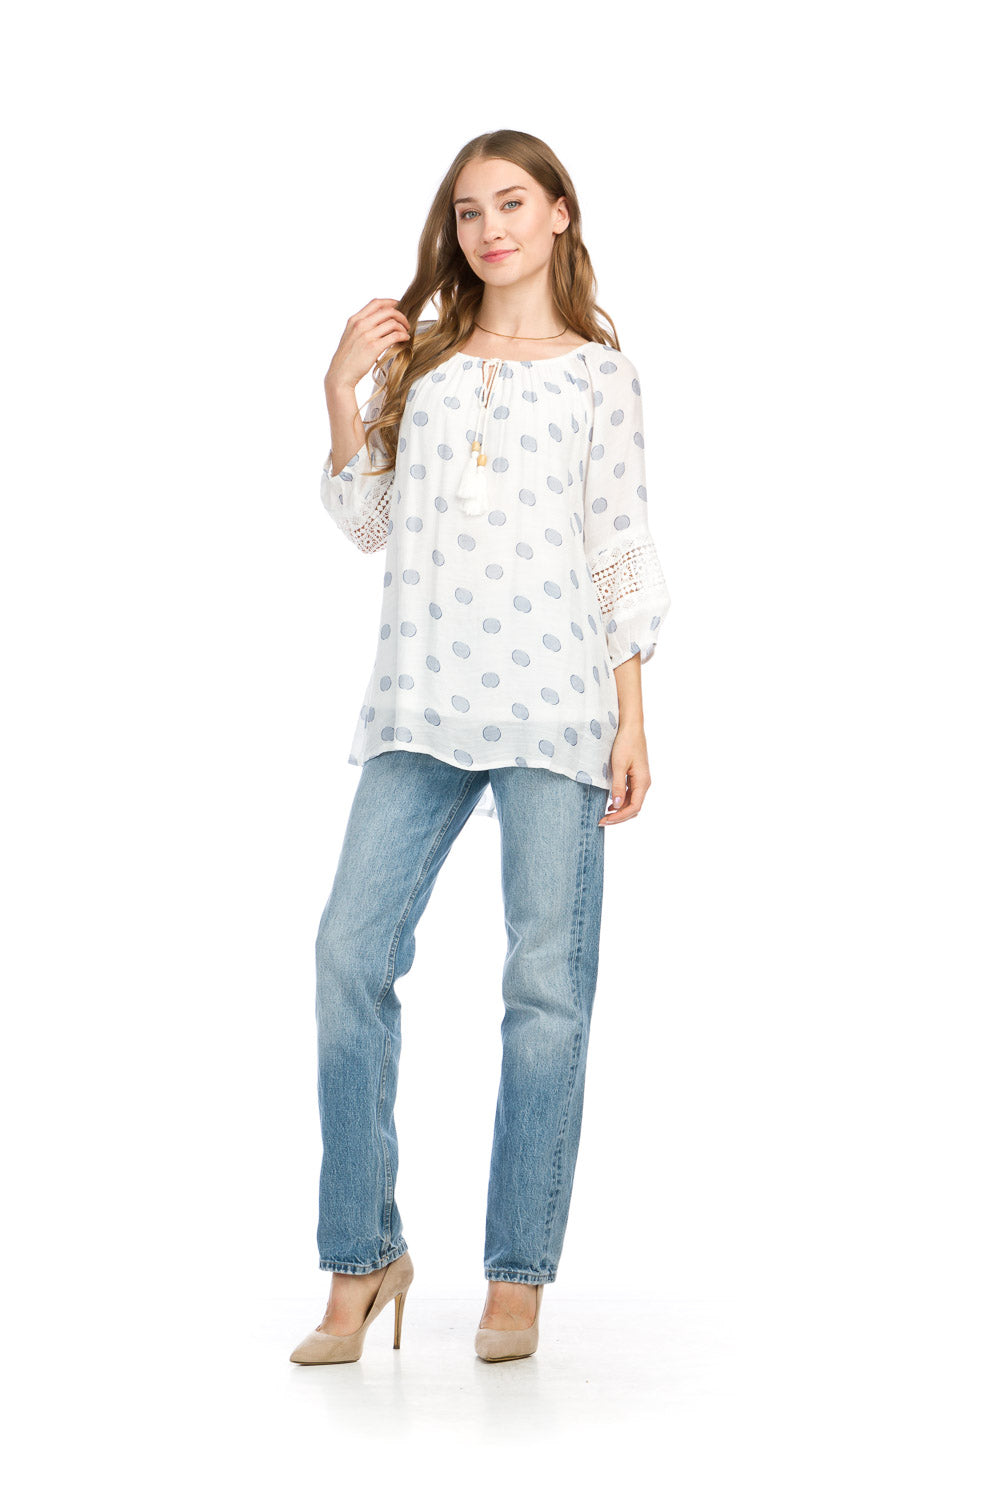 PT-16023 - POLKA DOT BLOUSE WITH LACE DETAIL